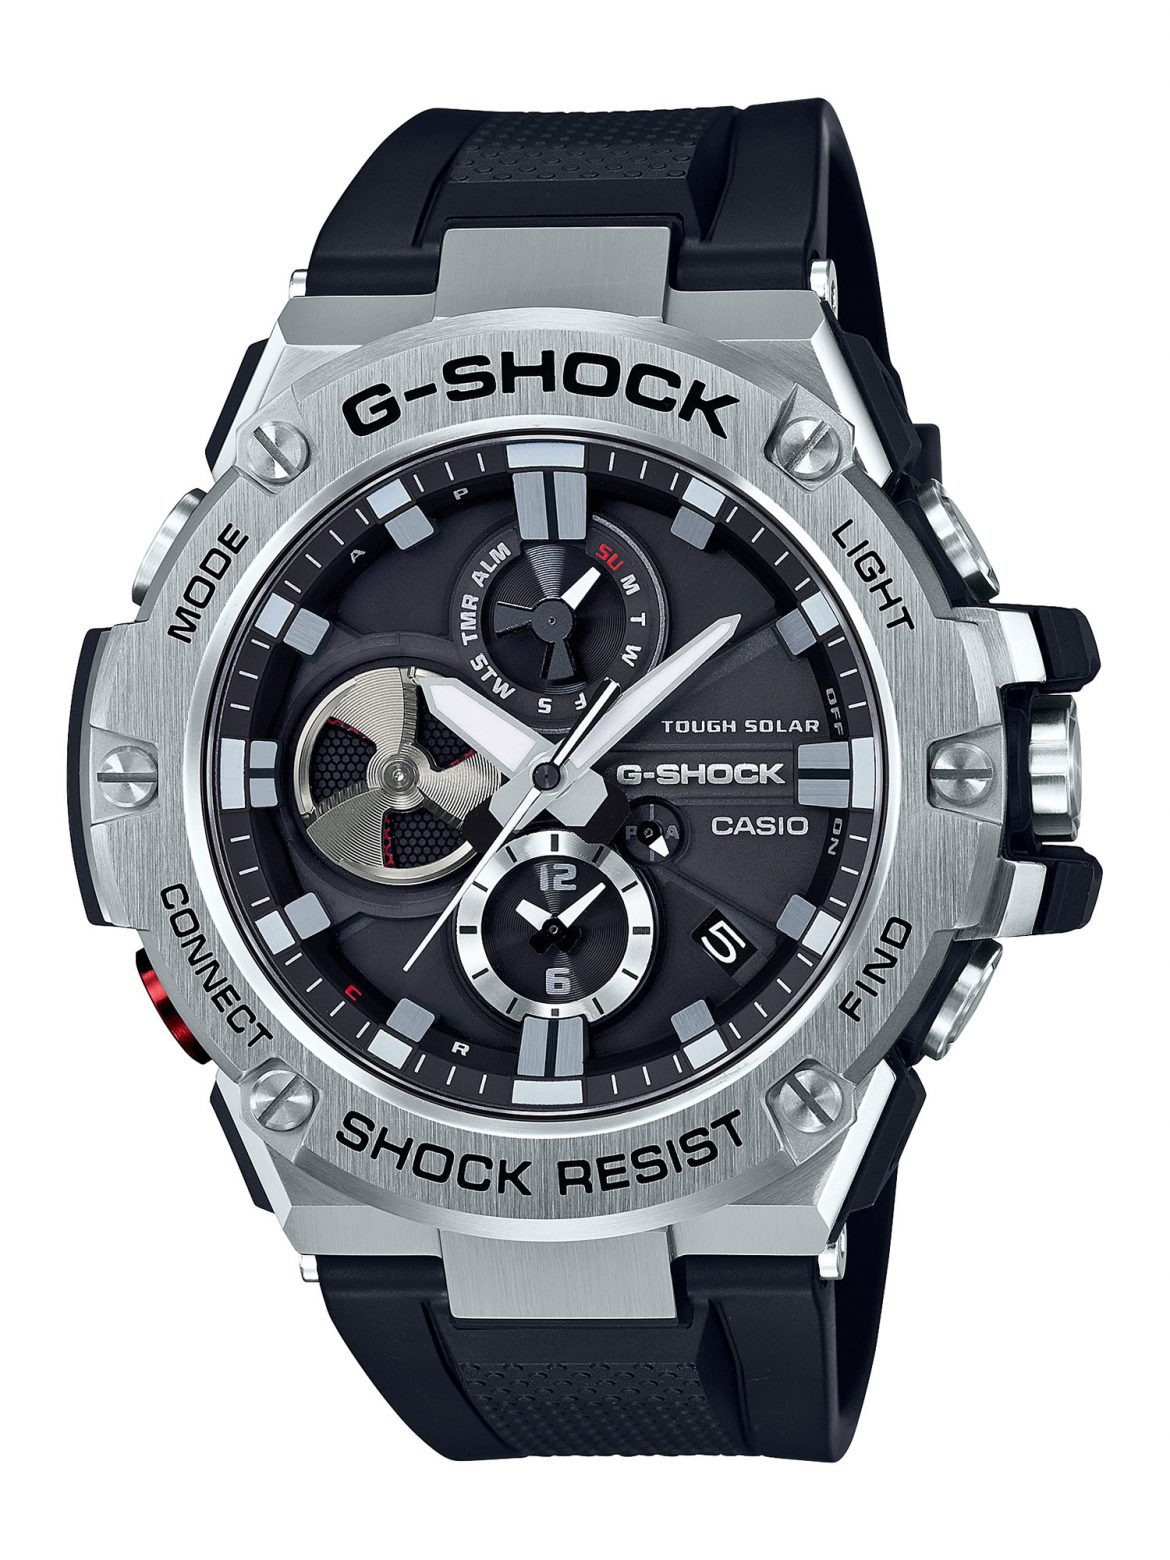 CASIO Releases New G-SHOCK with Connected Engine Module and Analog